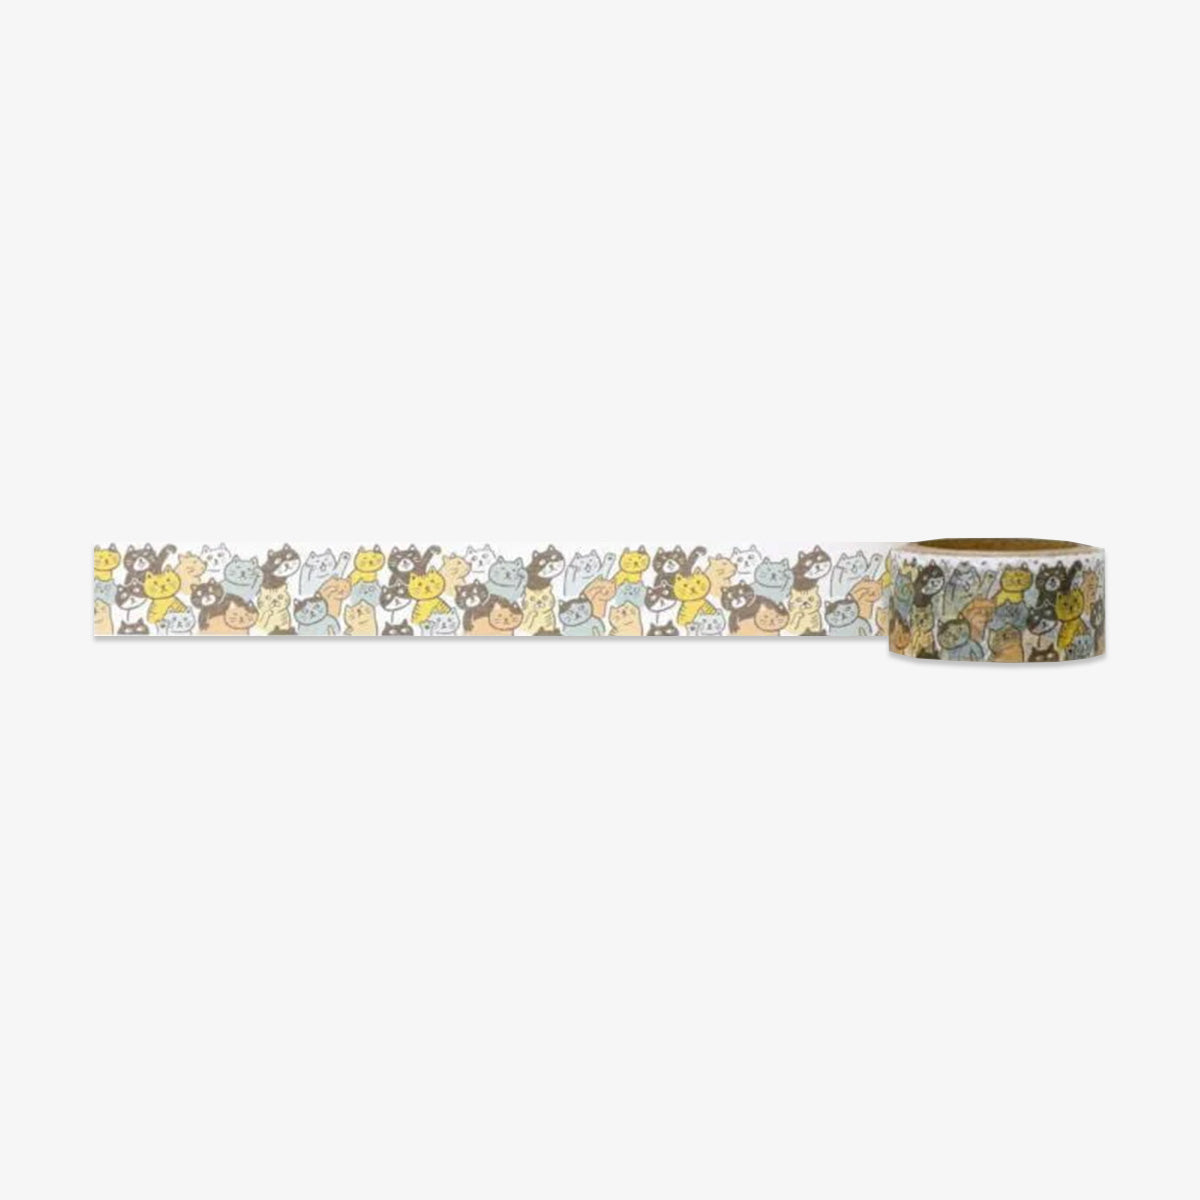 HIGHTIDE MASKING TAPE // LOTS OF CATS